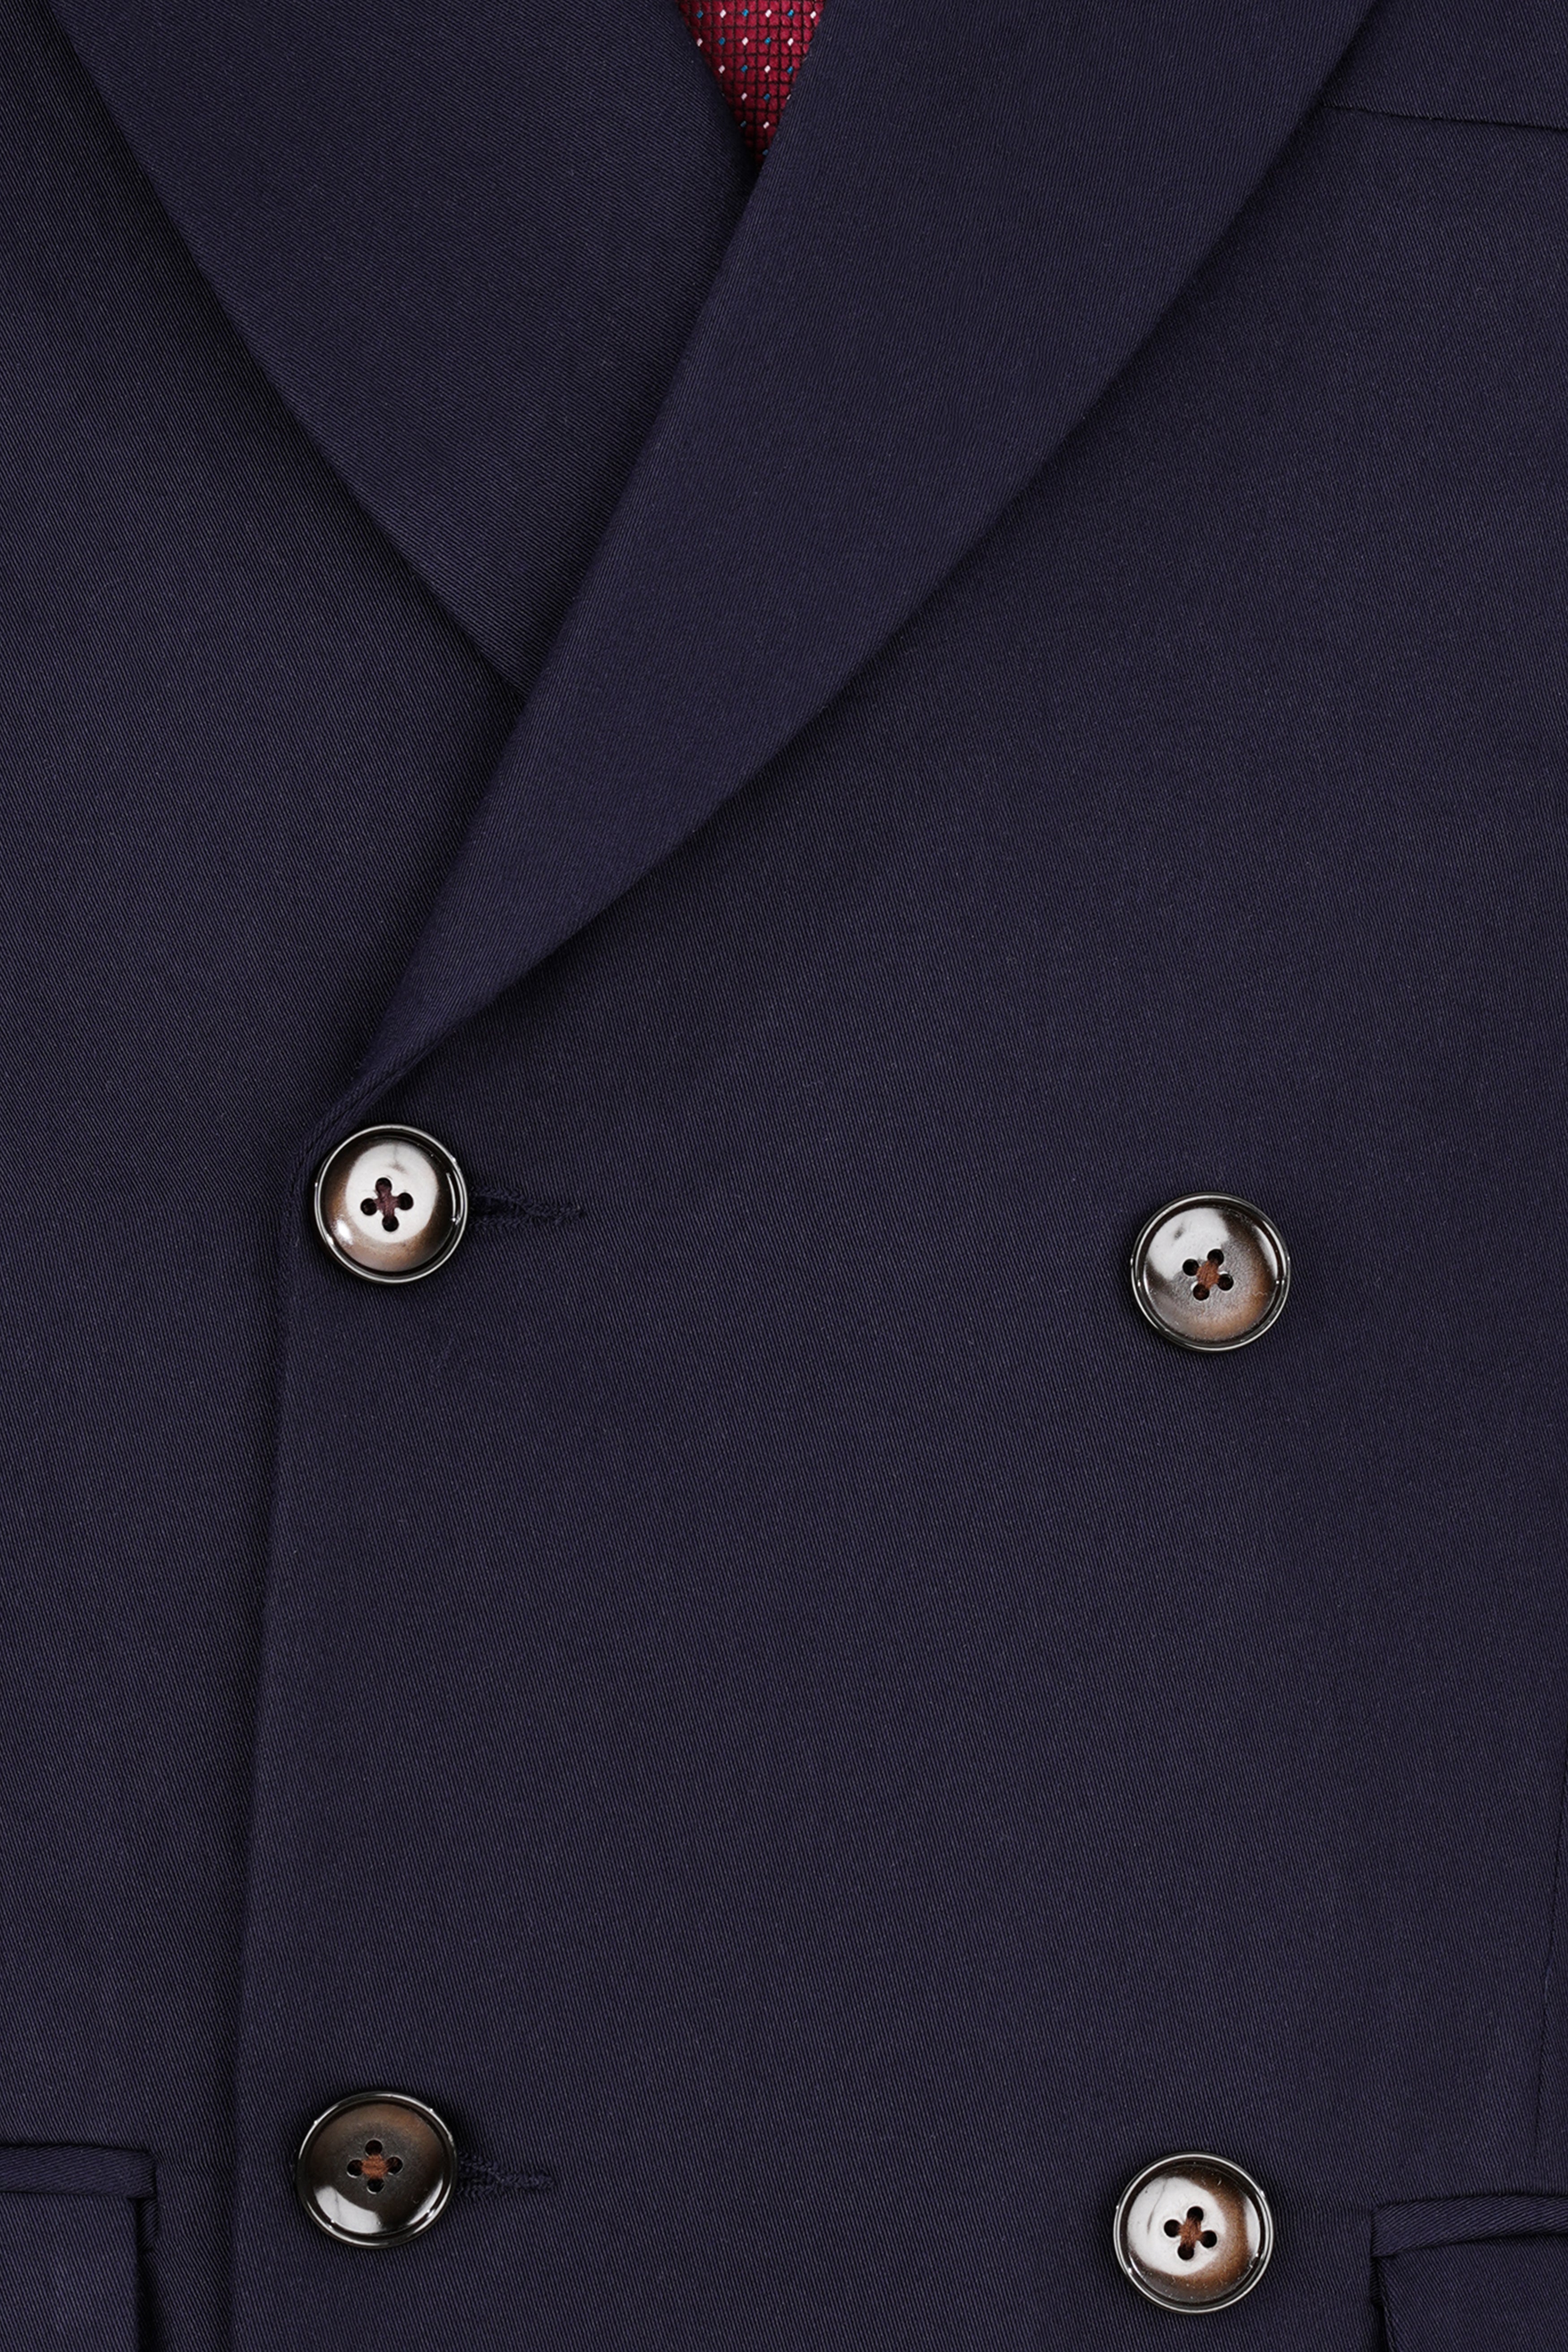 Mirage Navy Blue Double Breasted Suit